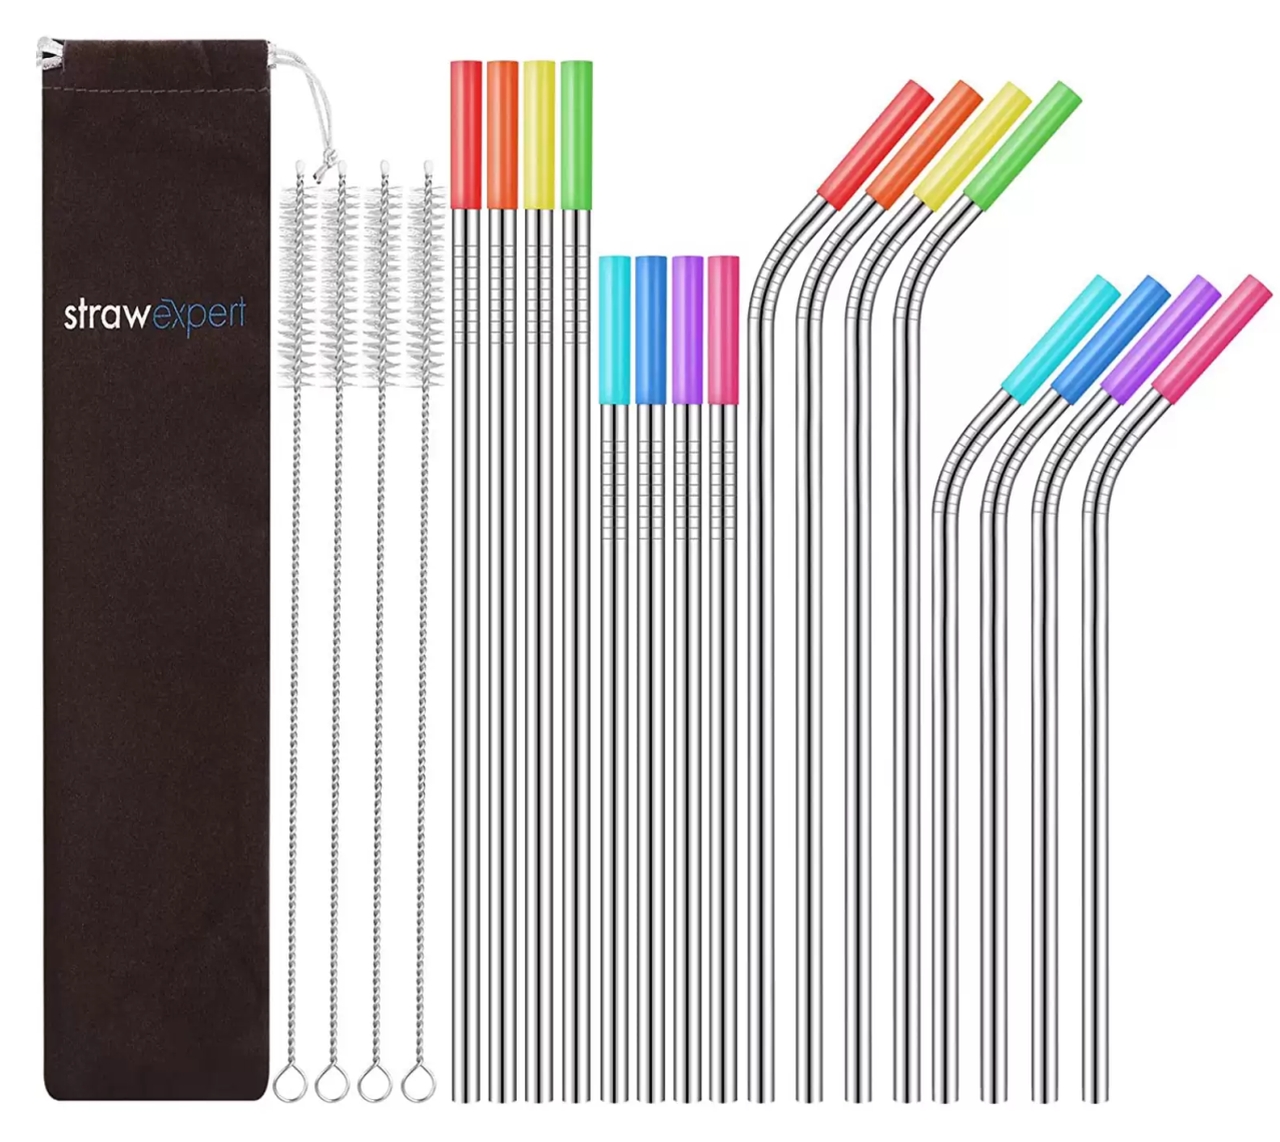 StrawExpert Reusable Stainless Steel Straw